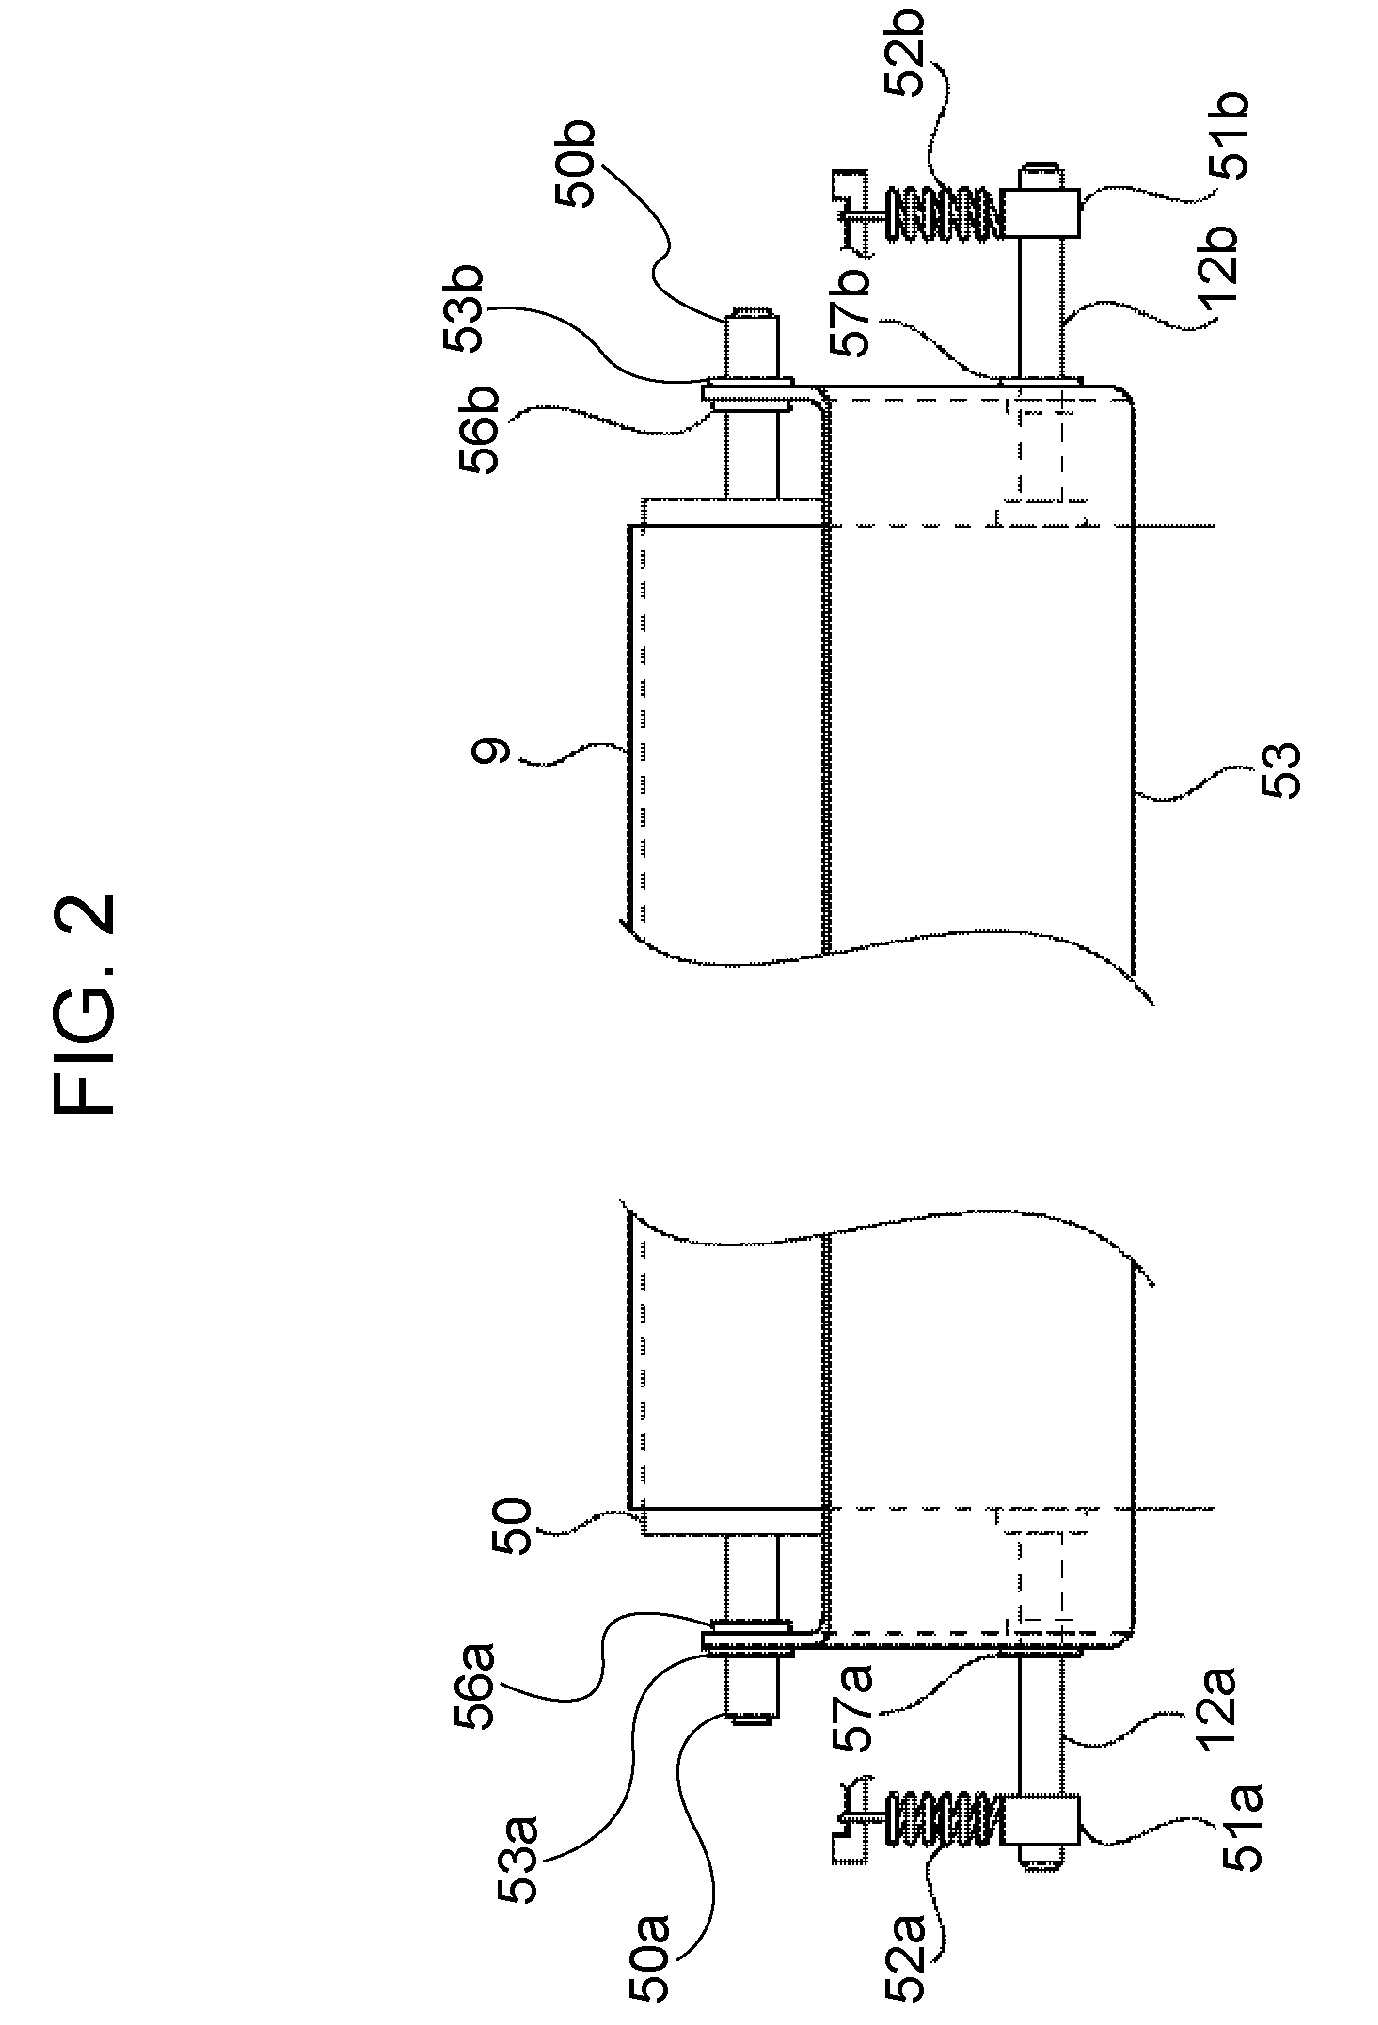 Image-forming apparatus having movable tensioner and electrode member that reduce toner scatter